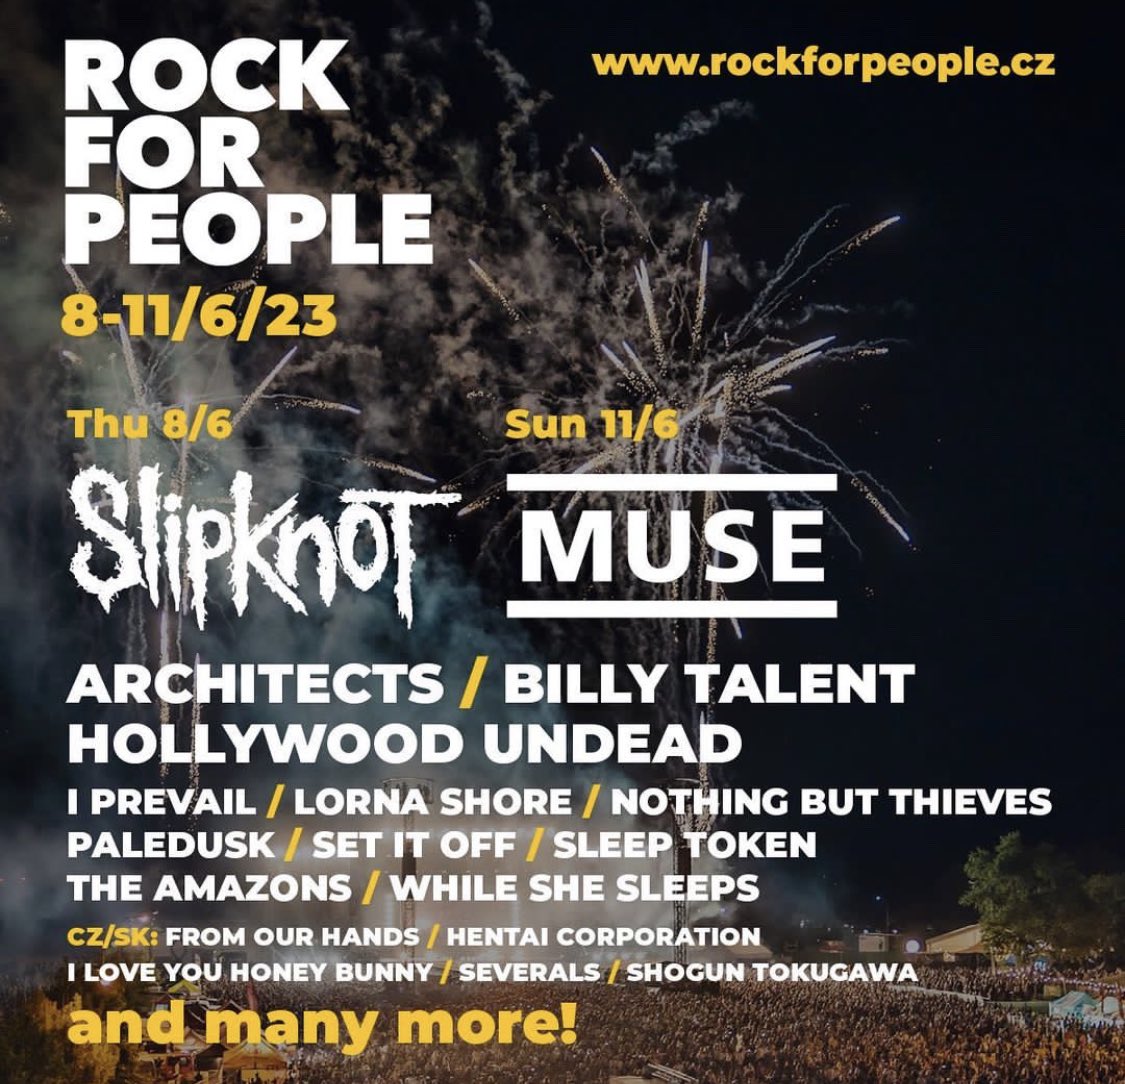 This points at either Muse or Slipknot could be the big rock act for #randl23 👀